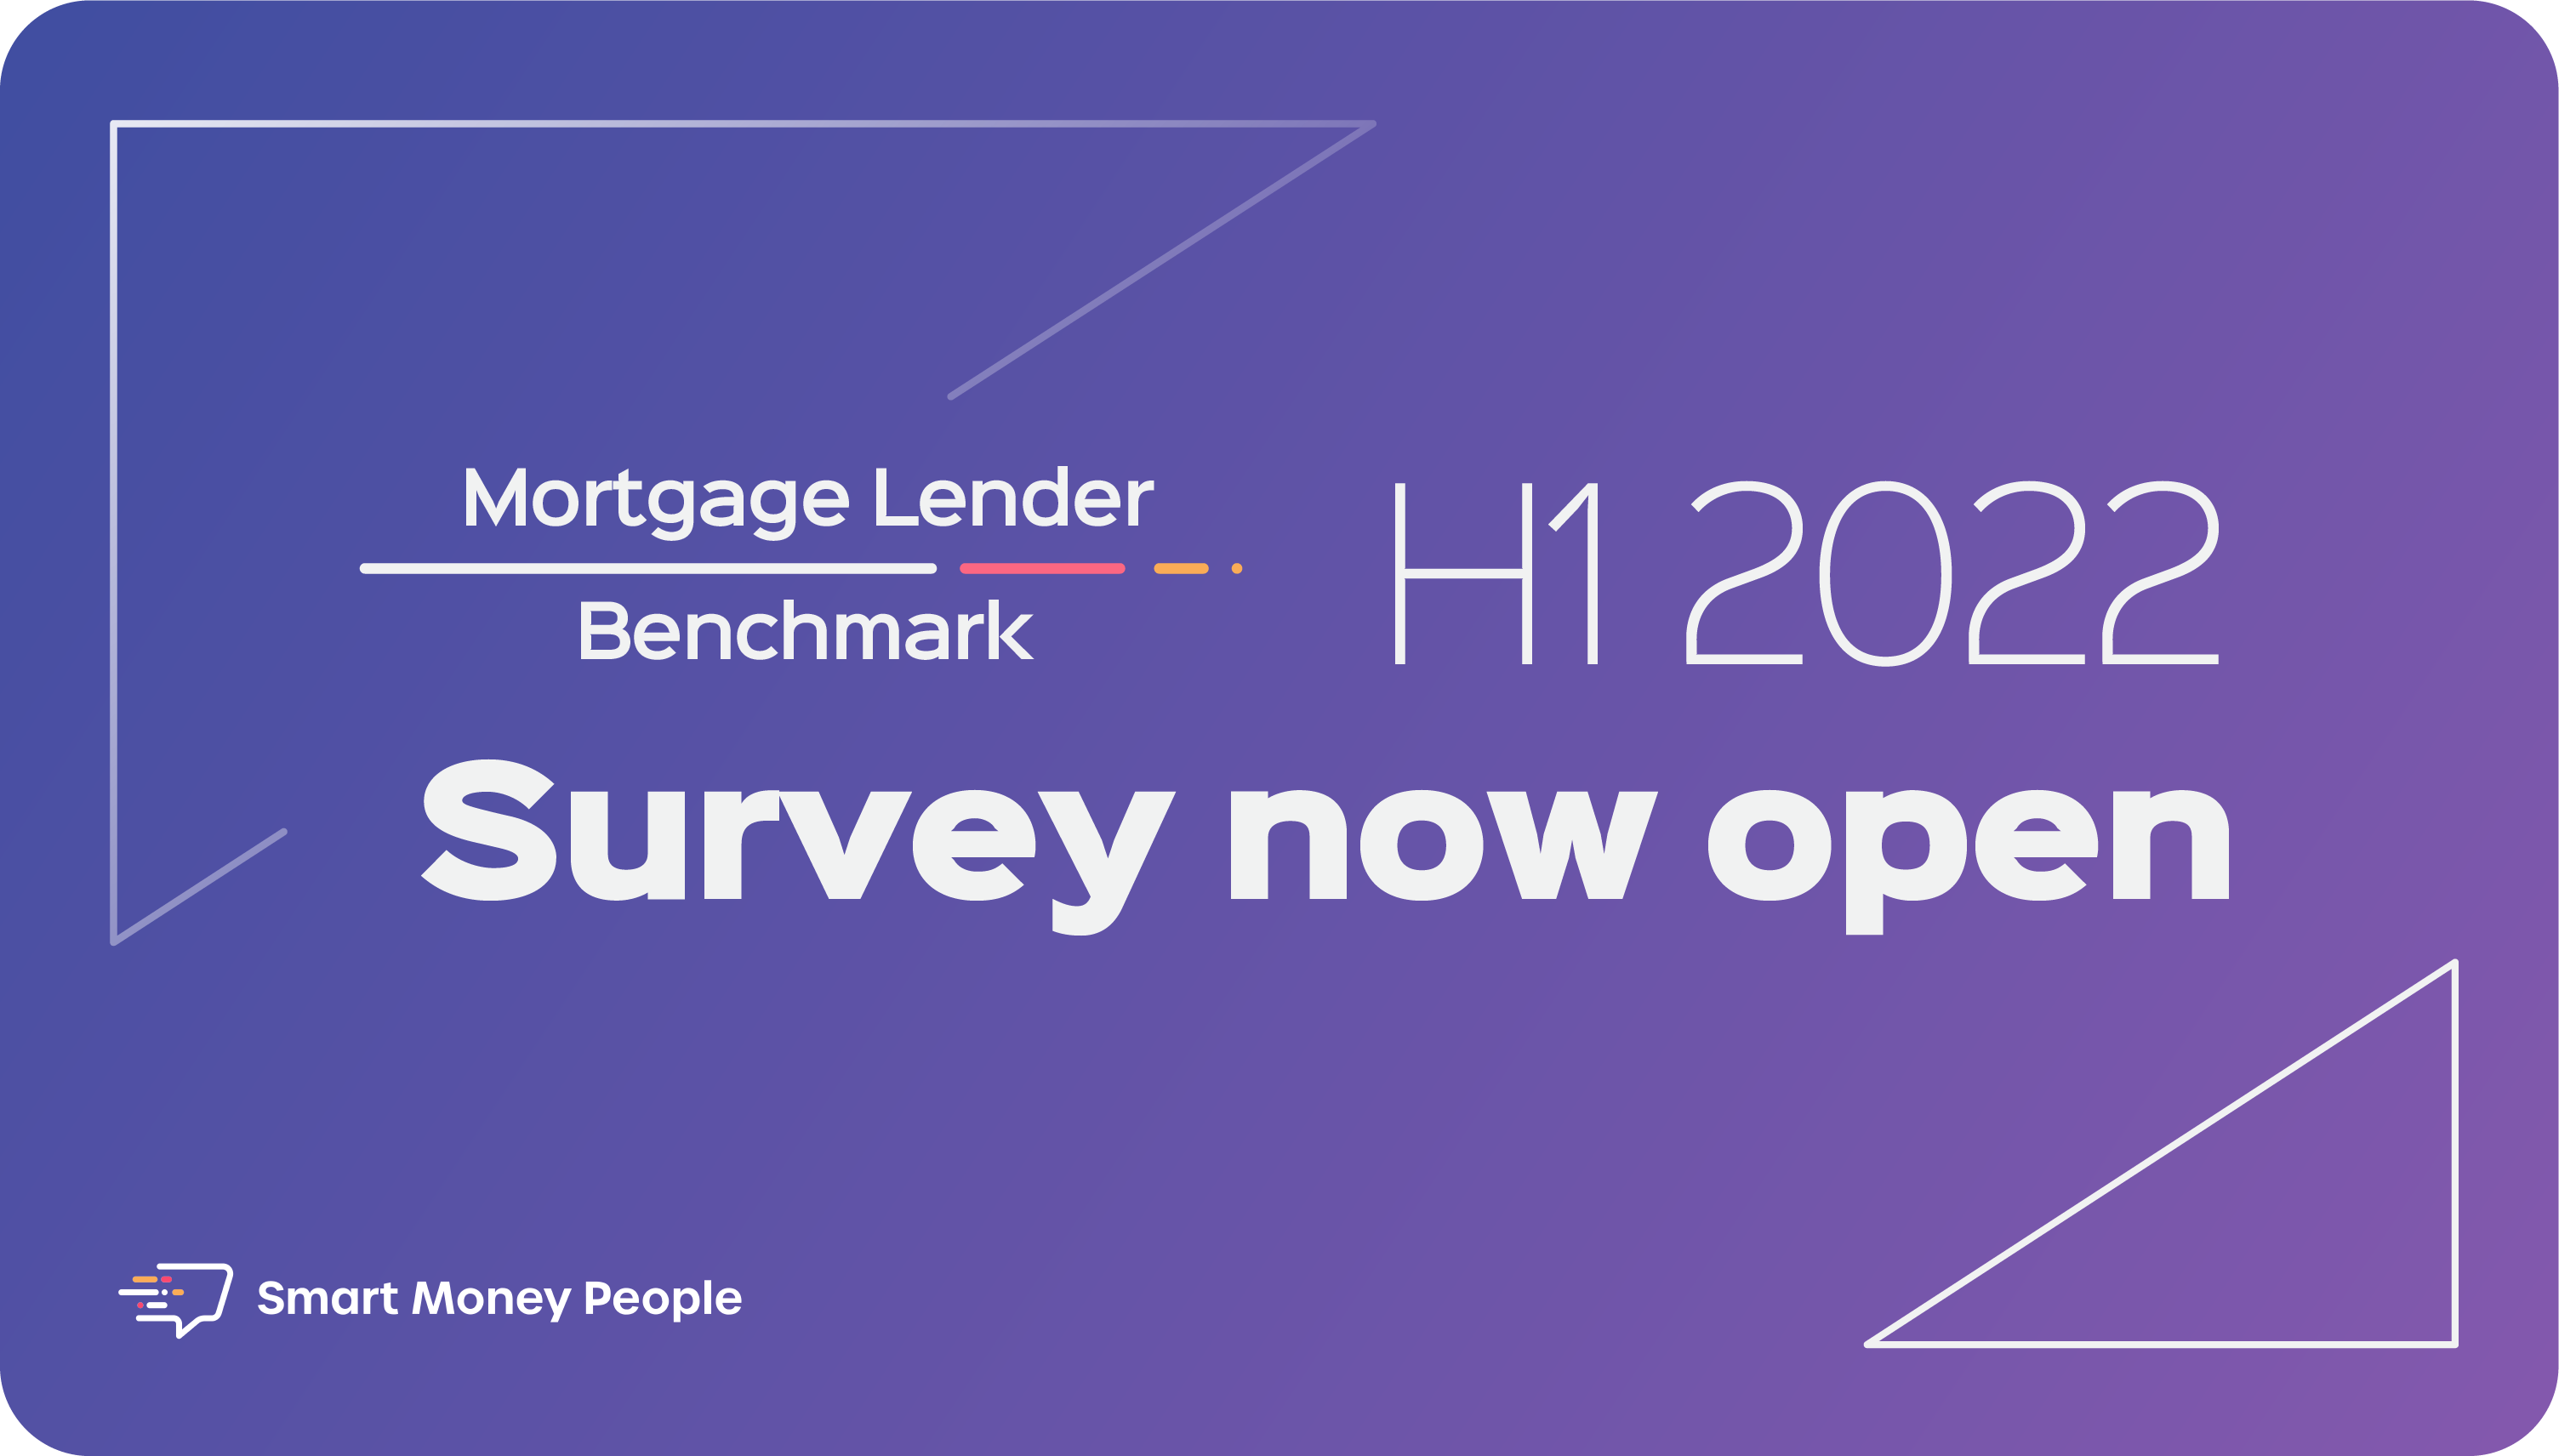 The Mortgage Lender Benchmark H1 2022 returns today